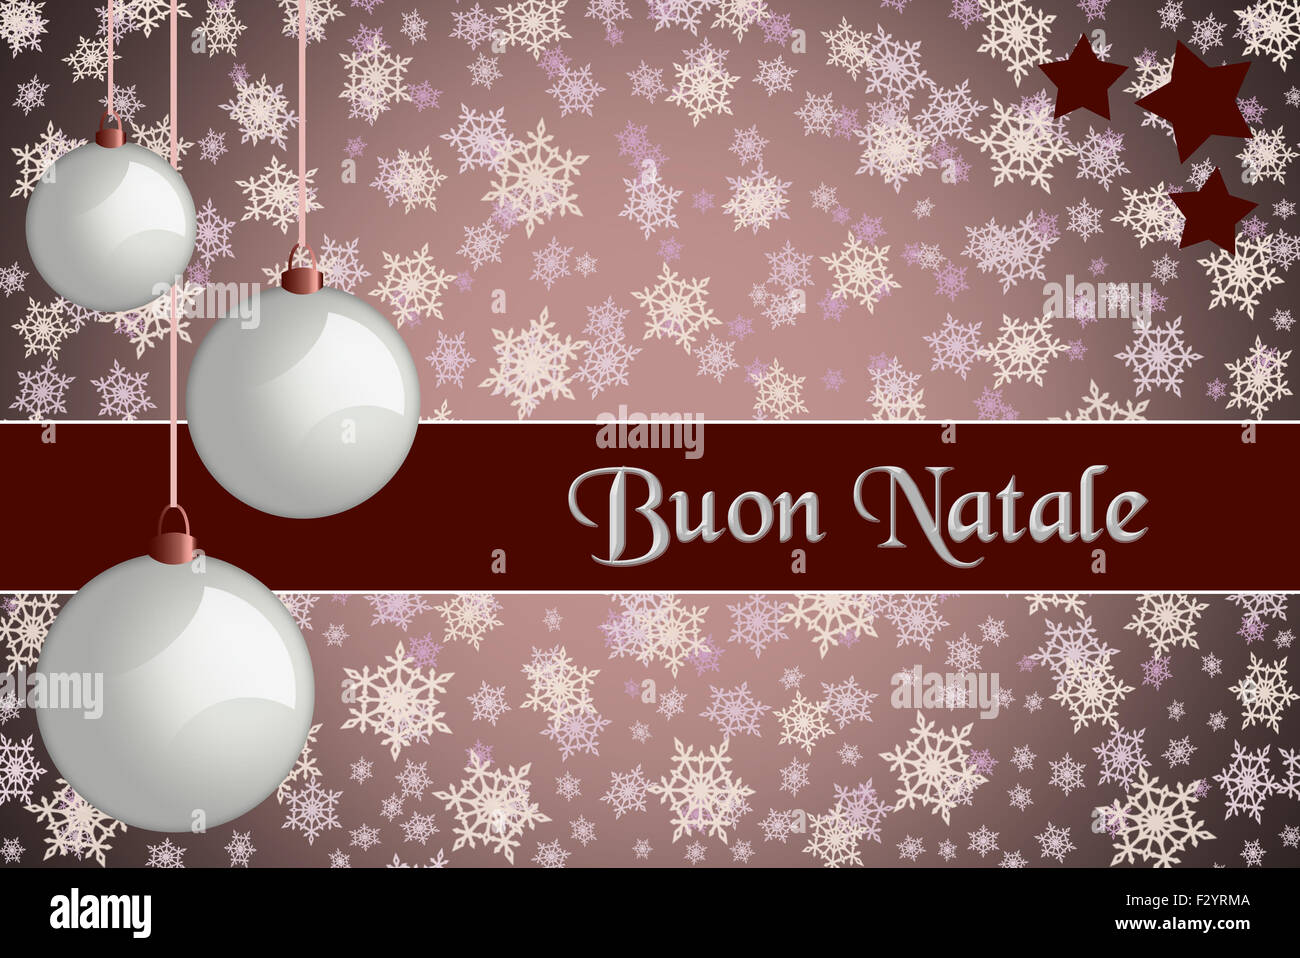 Buon Natale Wishes.Christmas Greeting Card Buon Natale Red Colored Christmas Card Stock Photo Alamy